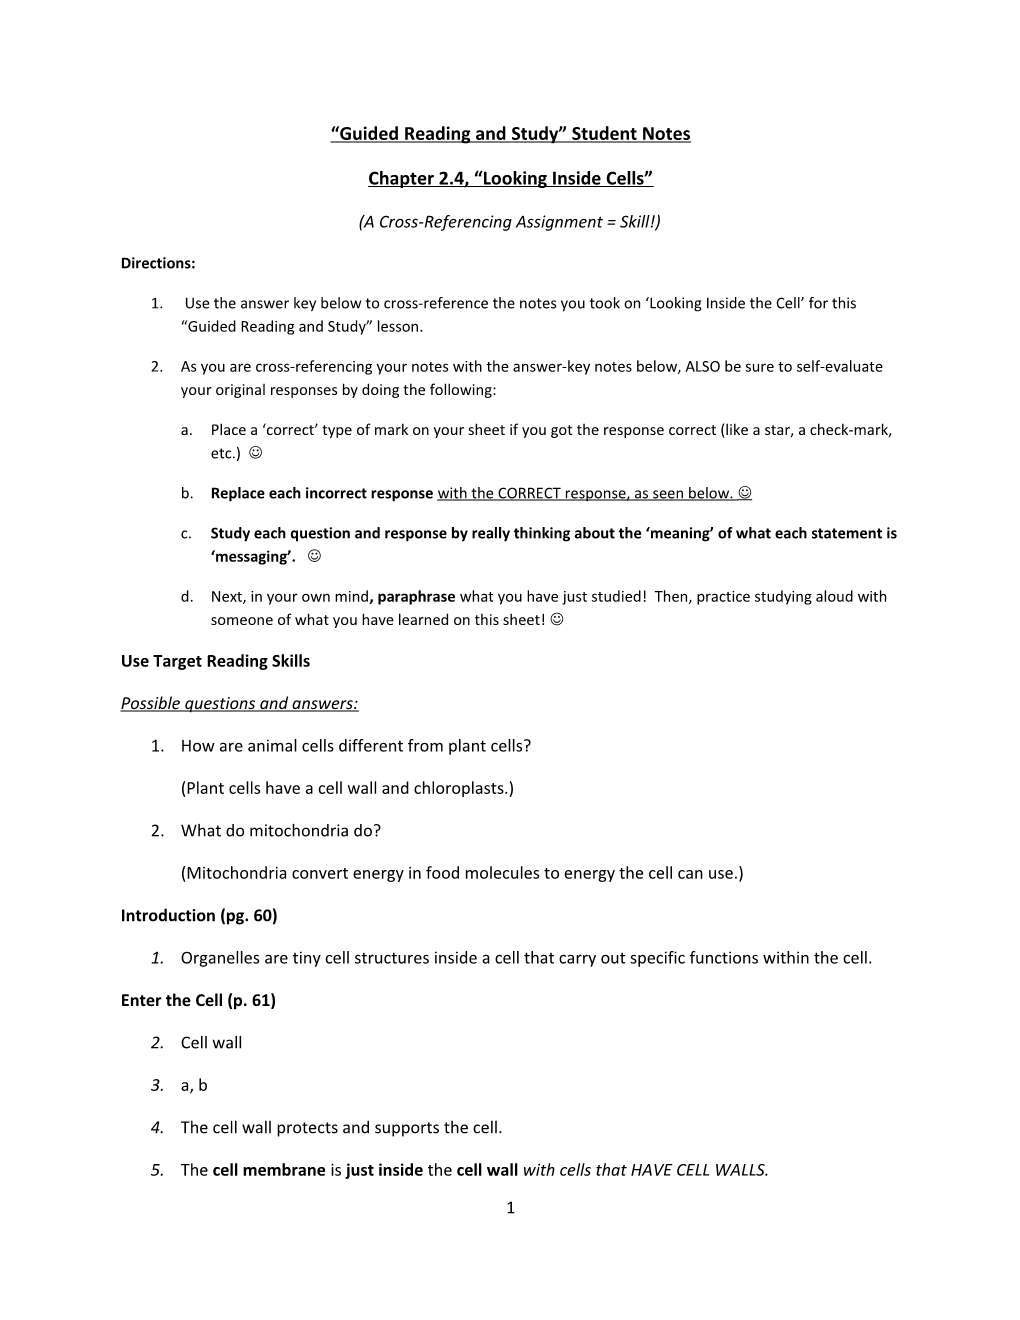 Guided Reading and Study Student Notes